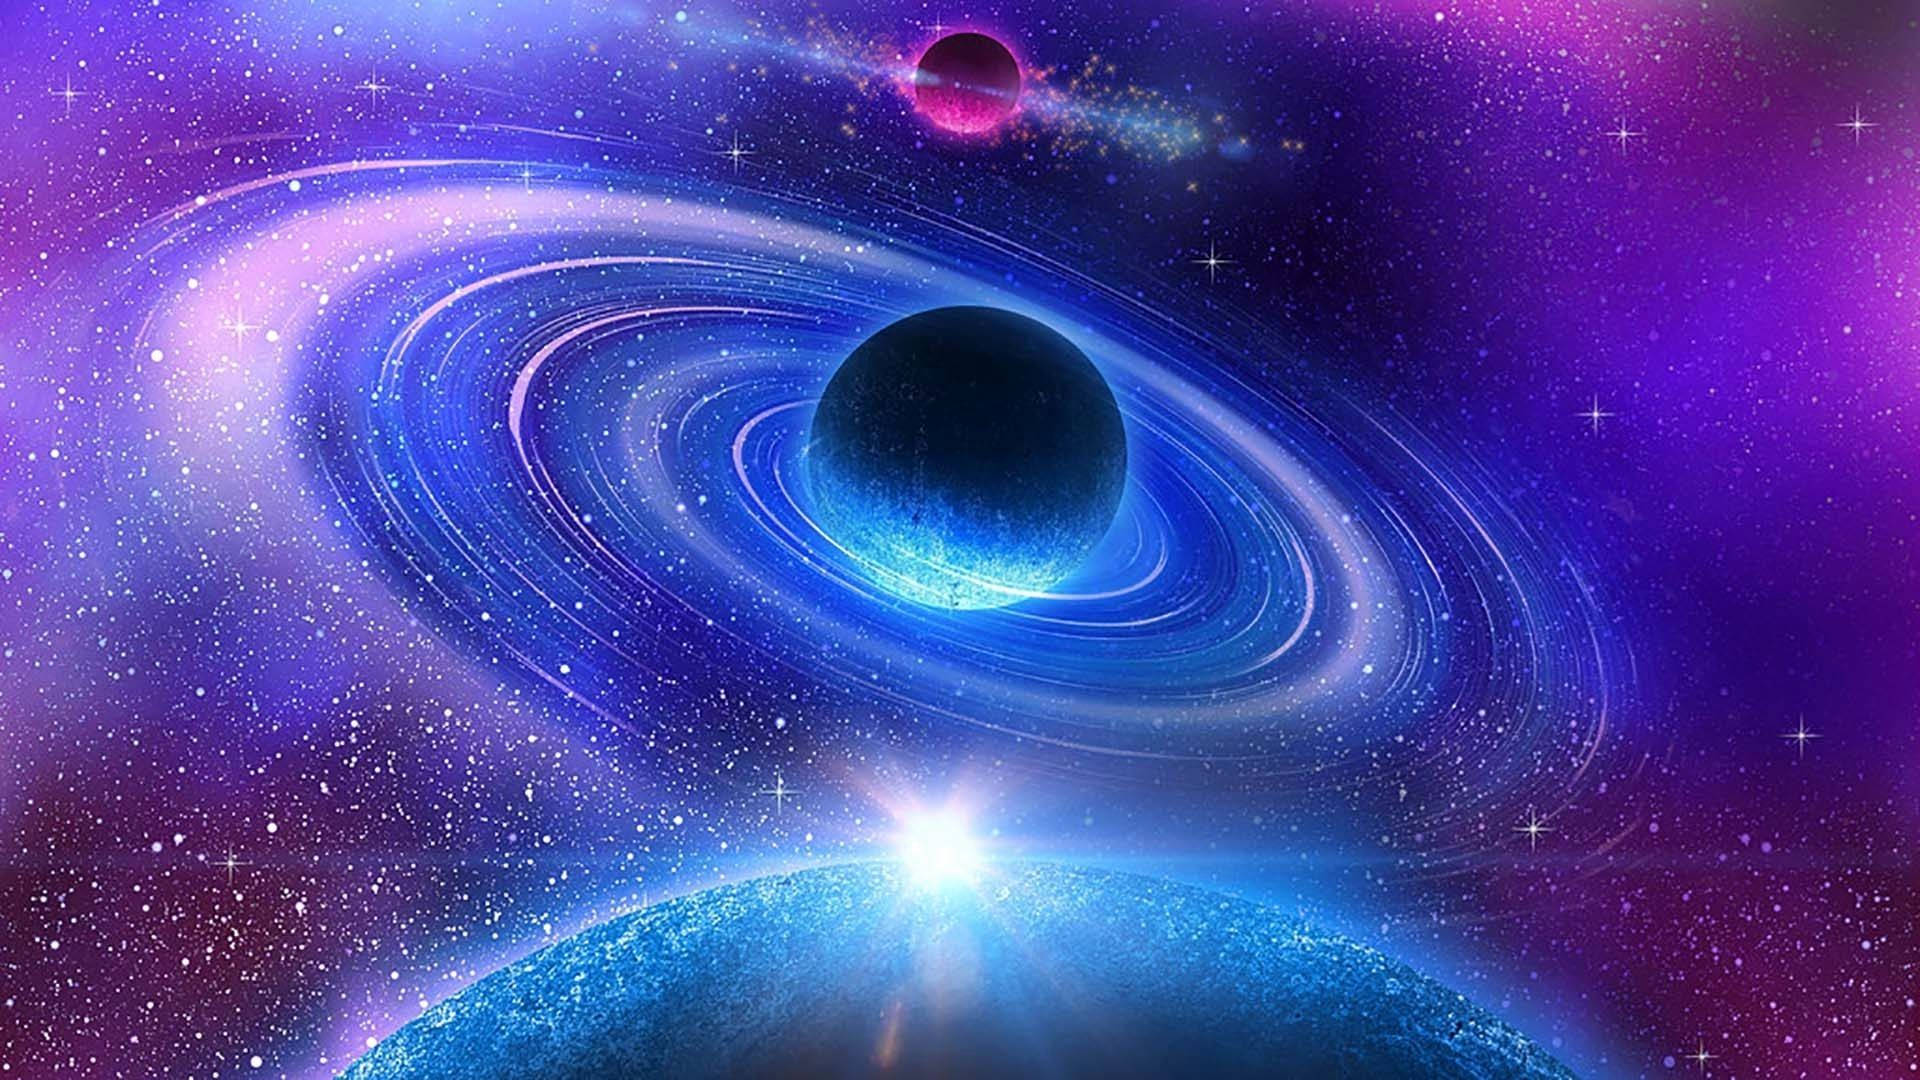 Planet With Rings On Galaxy Background